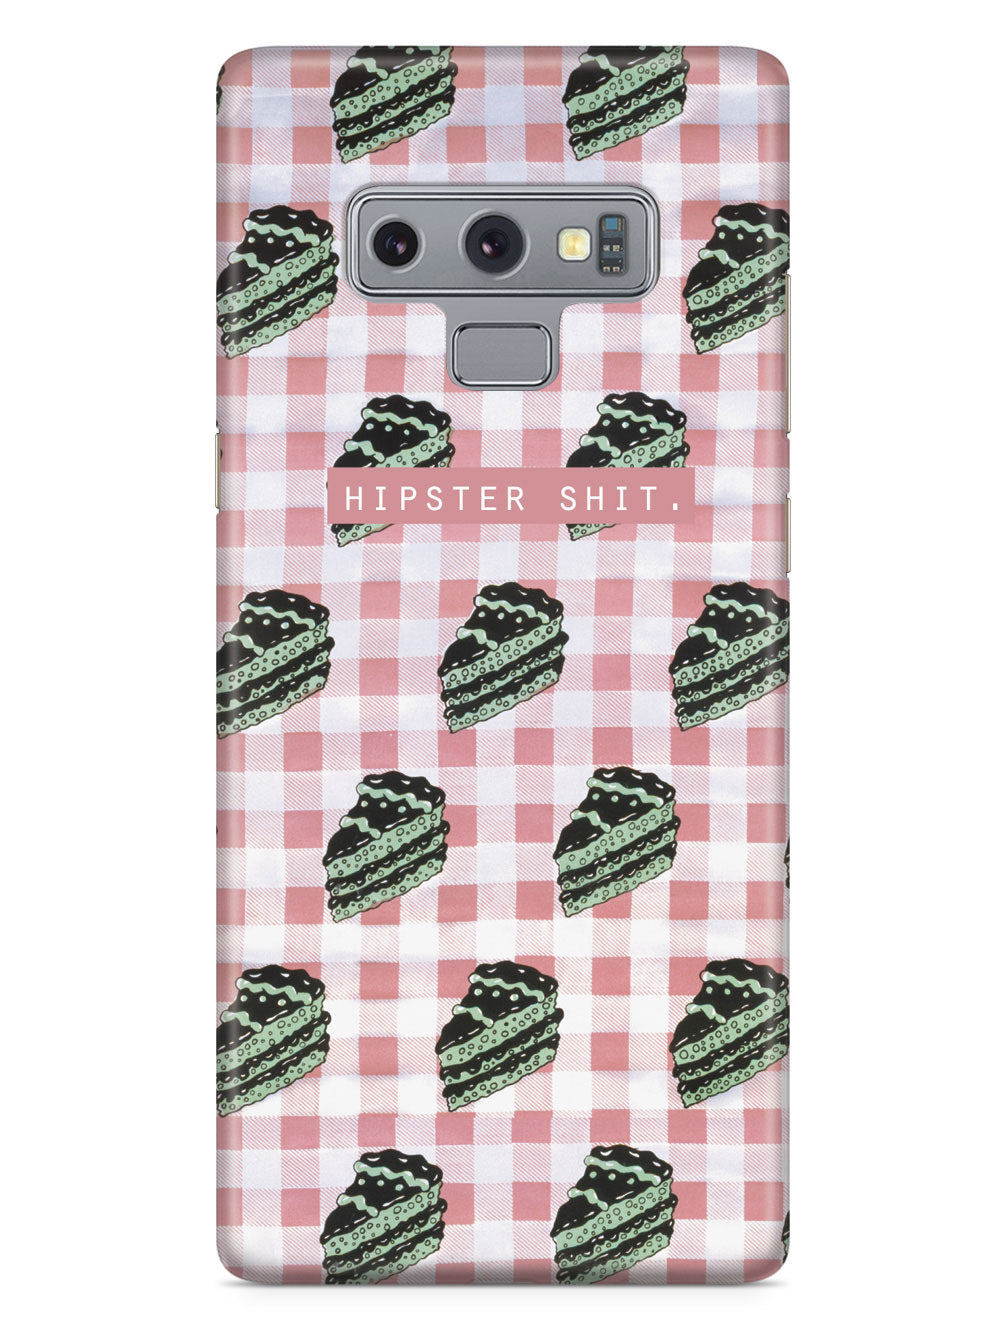 Hipster Shit Case